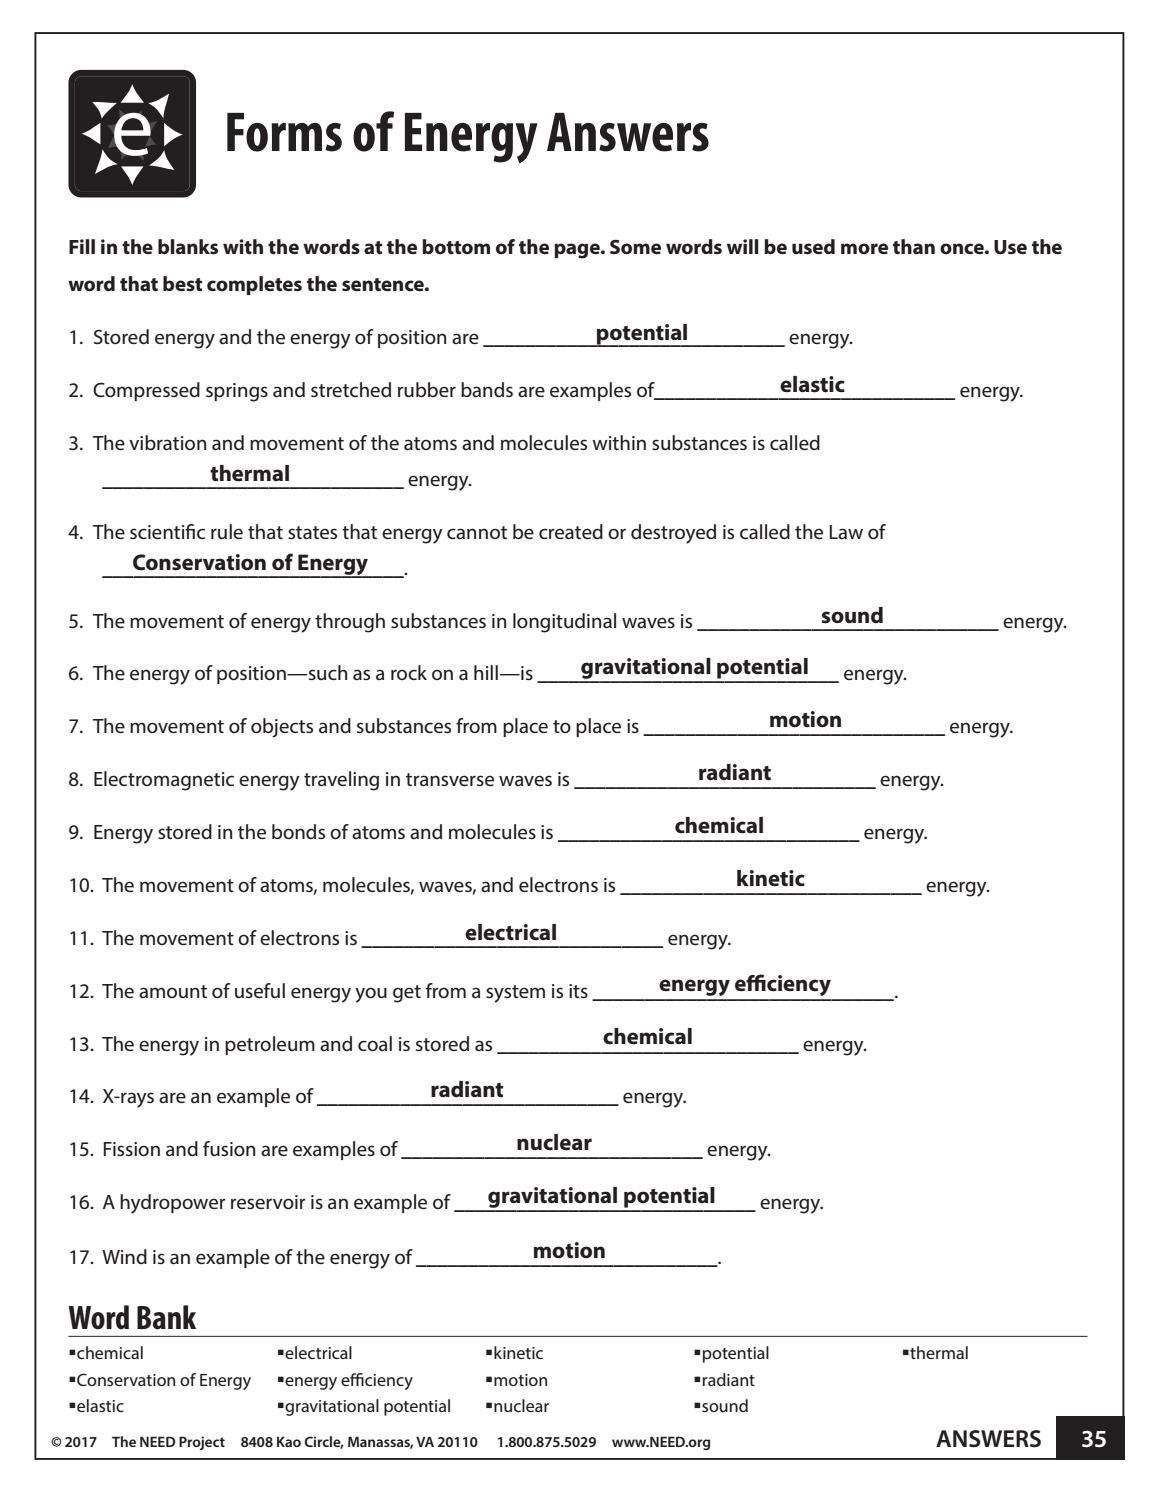 Forms Of Energy Worksheet Answer Key Multiplying Decimals Worksheet With Regard To Forms Of Energy Worksheet Answer Key